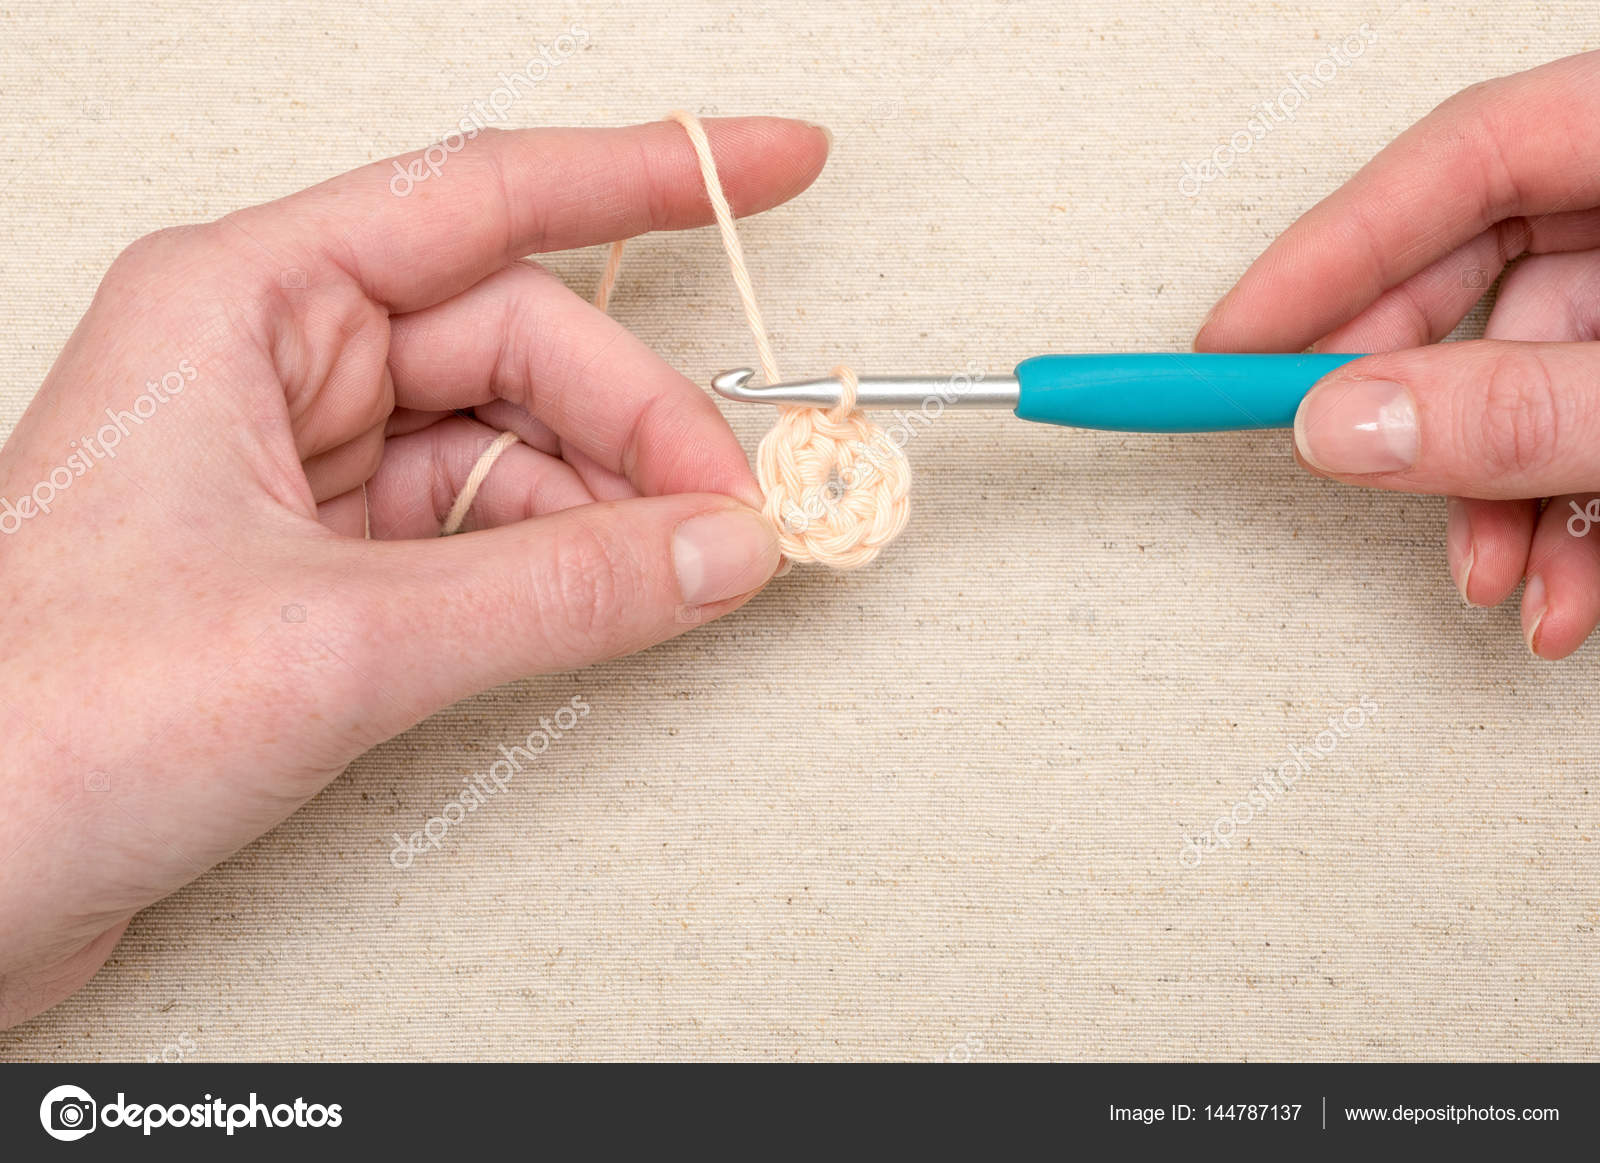 Crocheting Stitching Circular Pattern with Knitting Hook Stock Photo by  ©stock@photographyfirm.co.uk 144787137